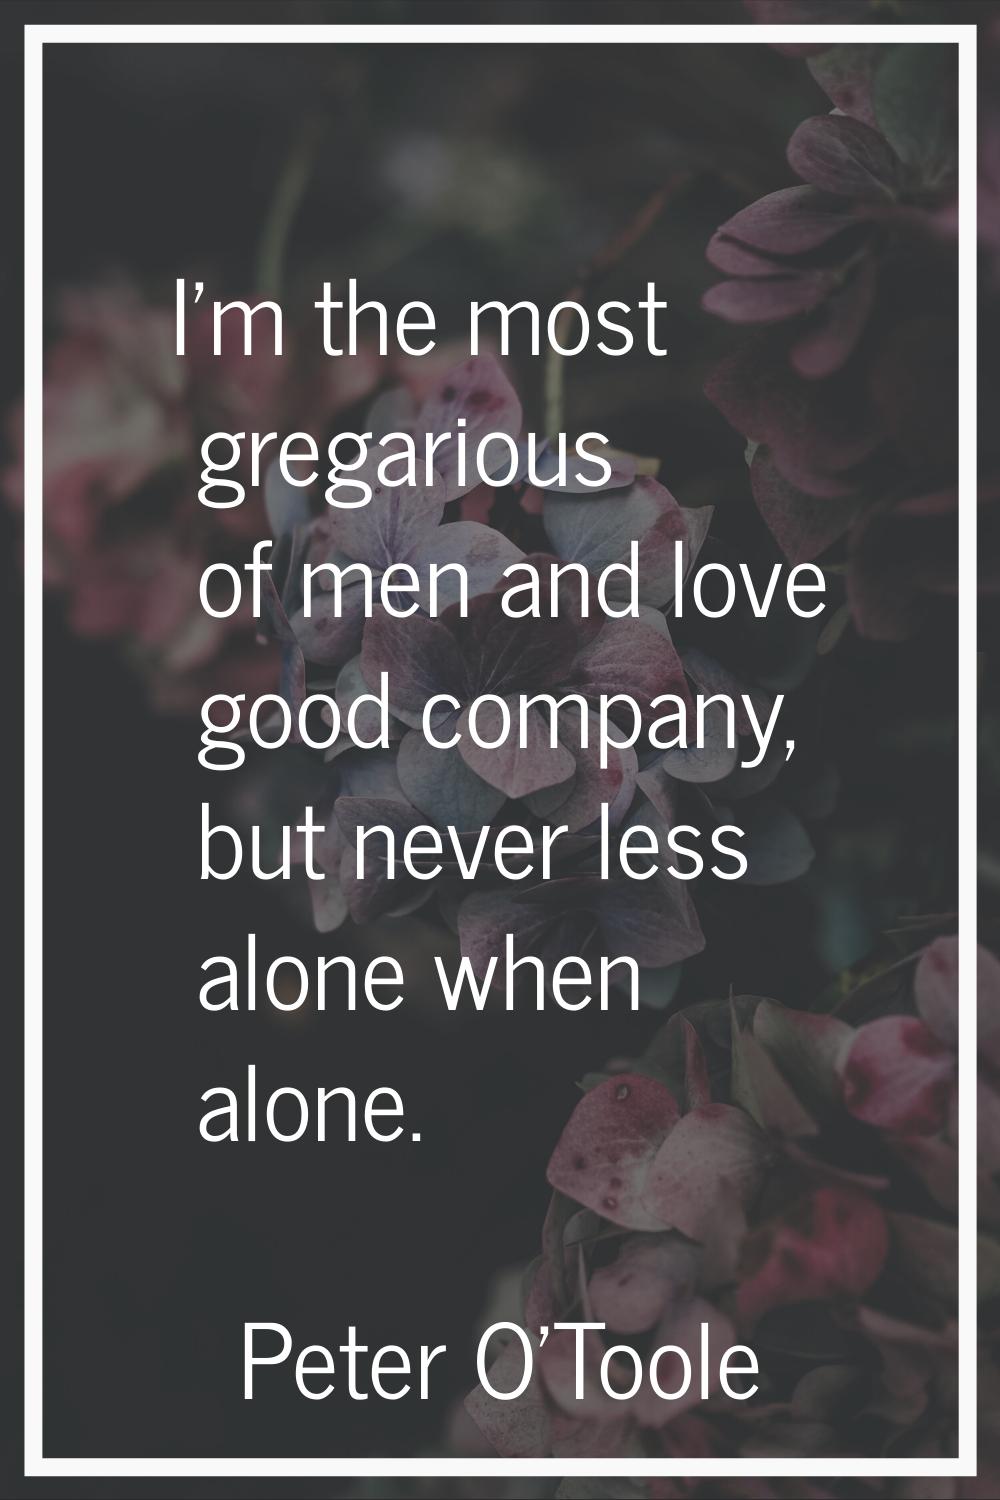 I'm the most gregarious of men and love good company, but never less alone when alone.